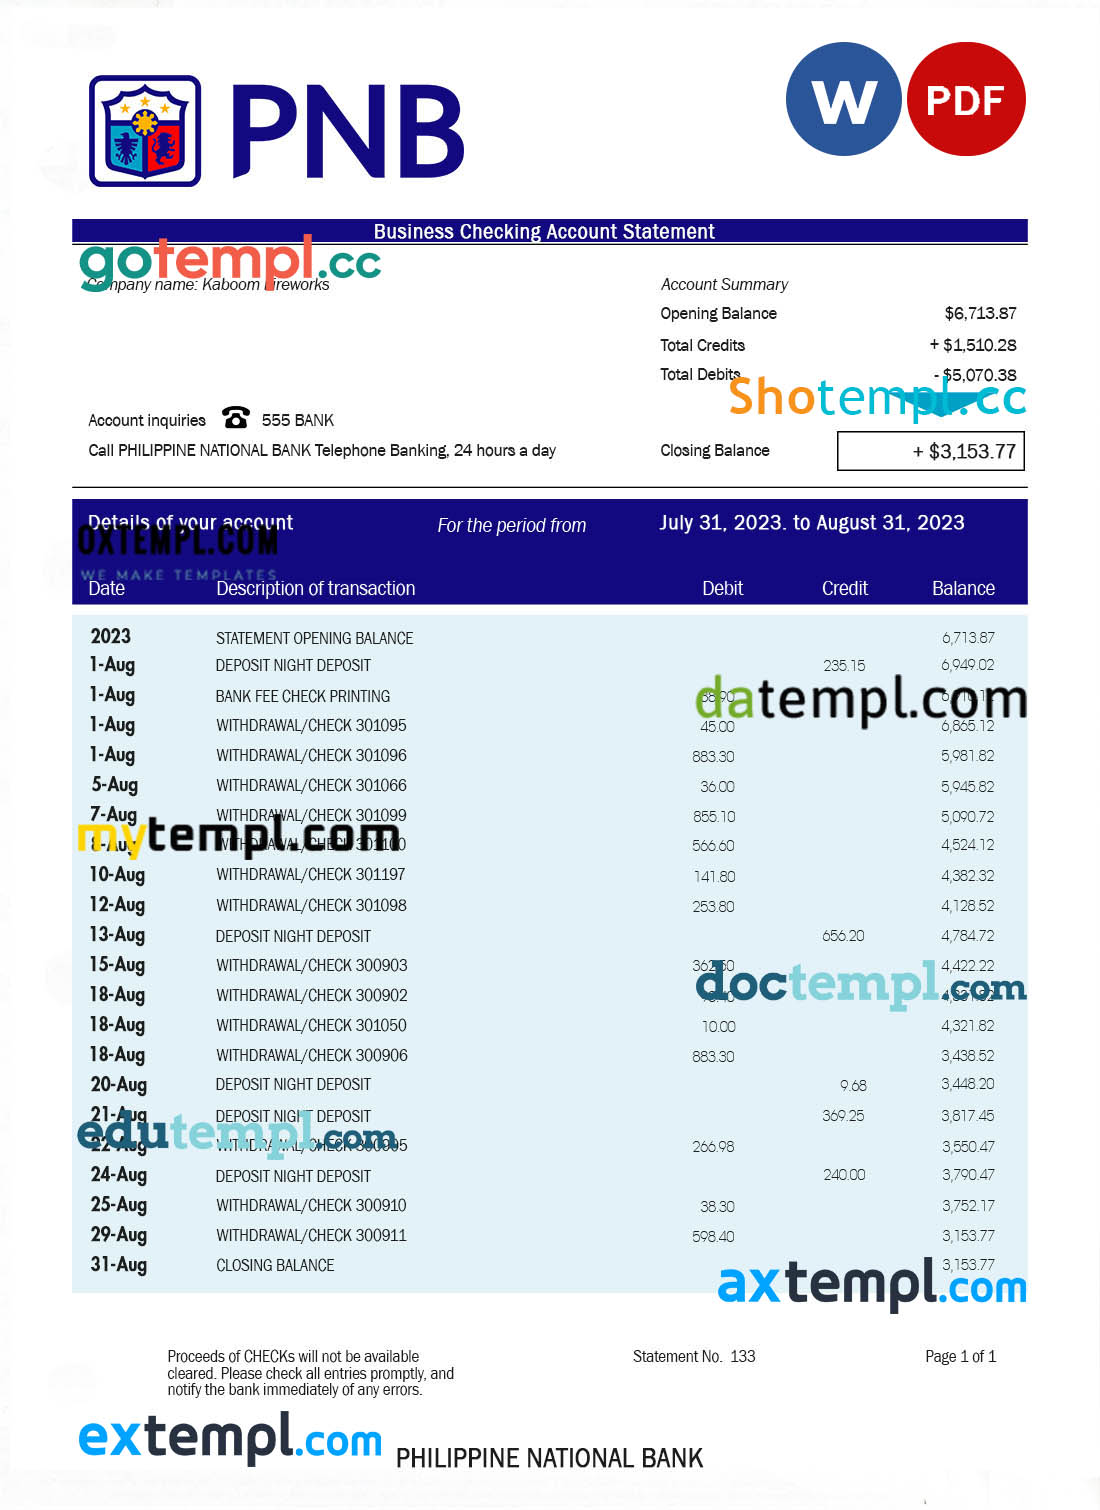 Peru Citibank bank statement easy to fill template in .xls and .pdf file format